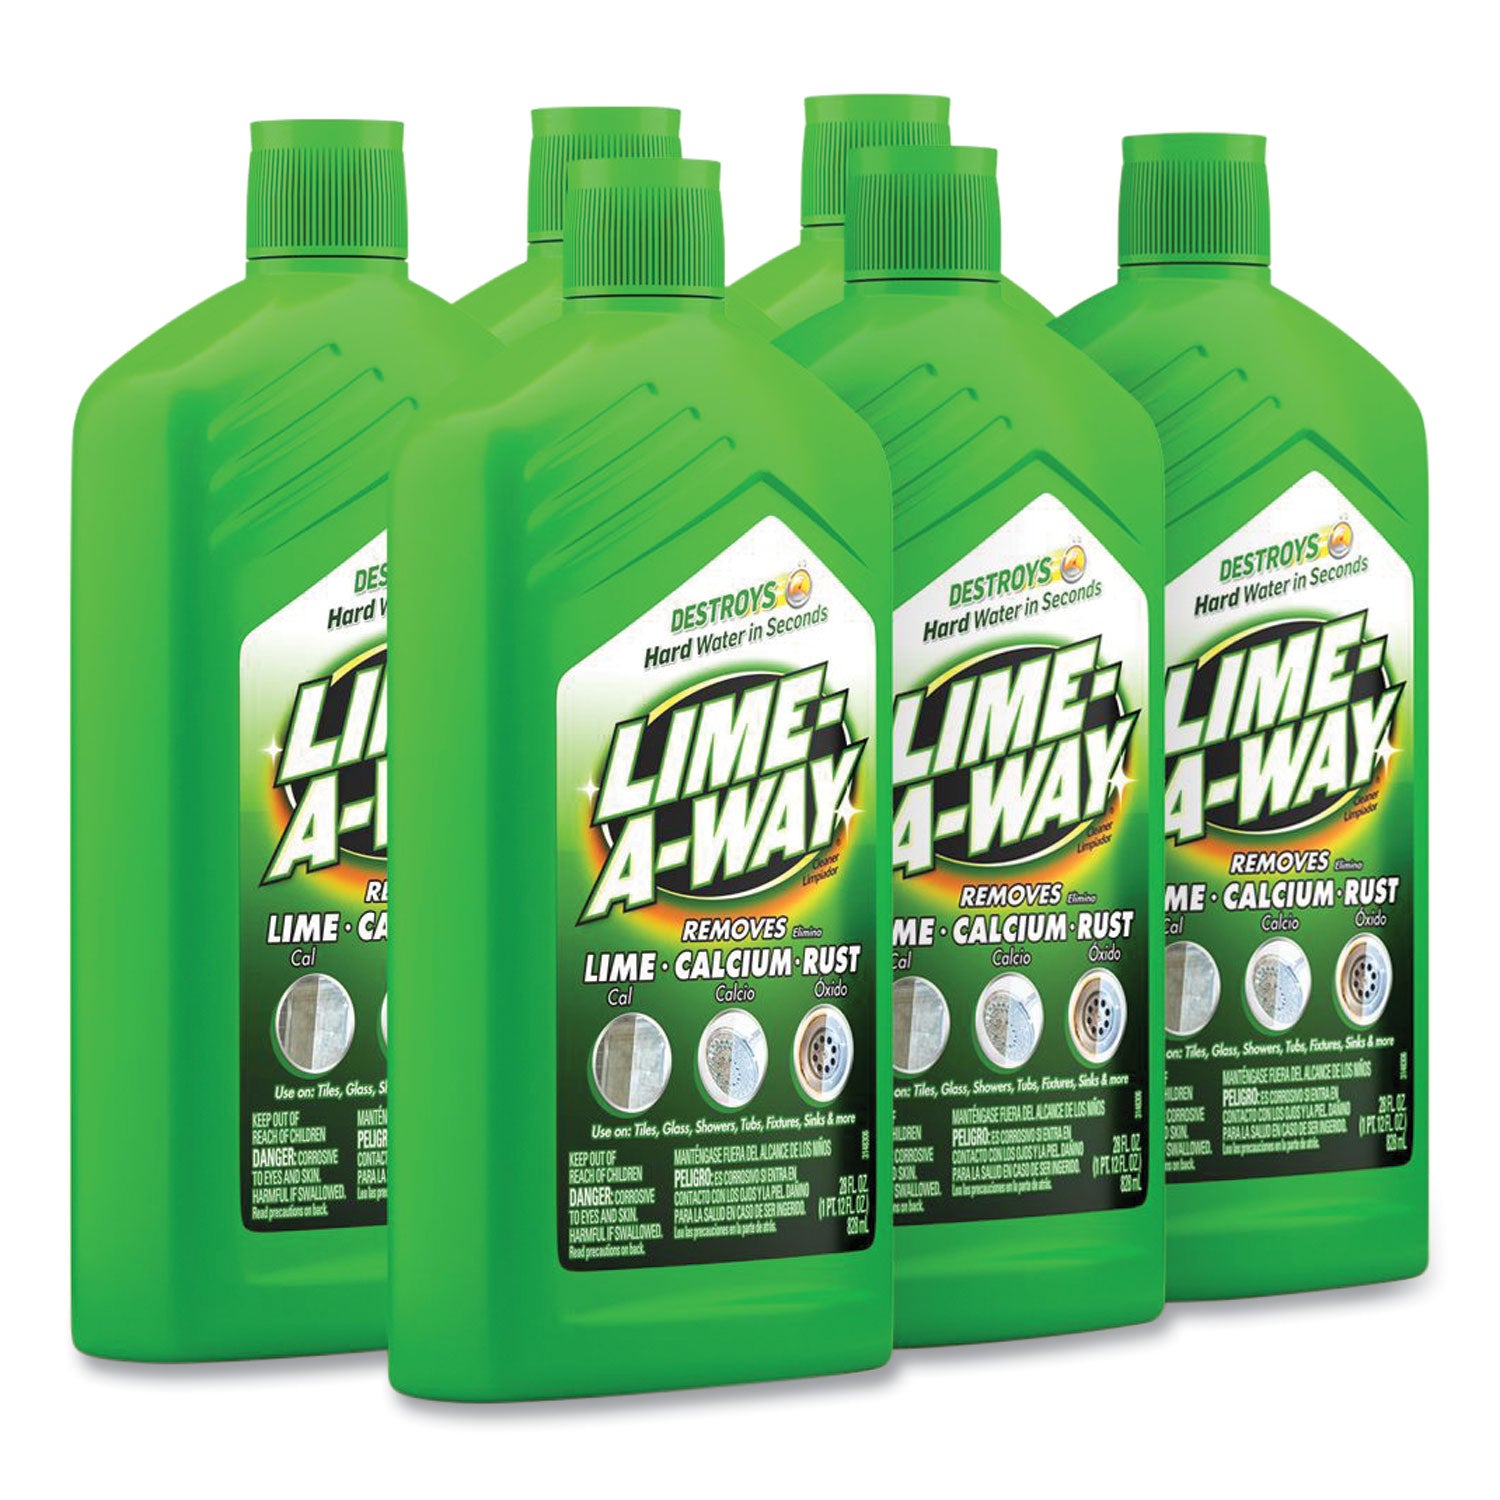 Lime, Calcium and Rust Remover, 28 oz Bottle - 